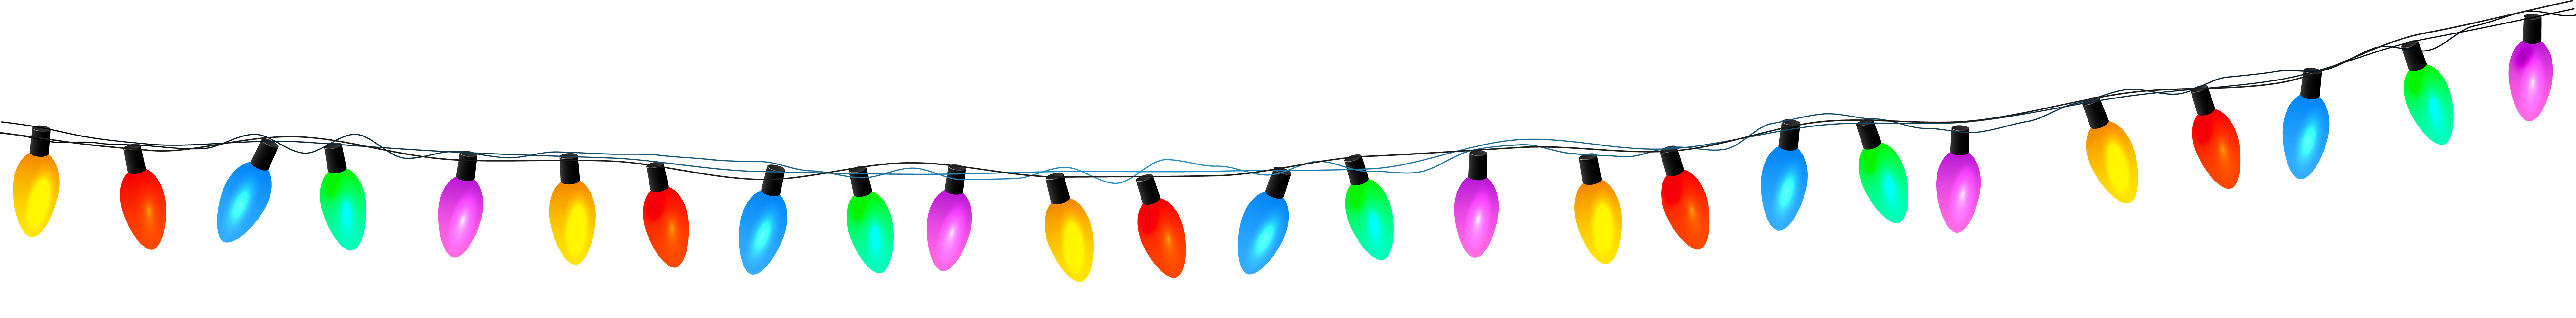 Lights Christmas Transparent Free Download Image Clipart